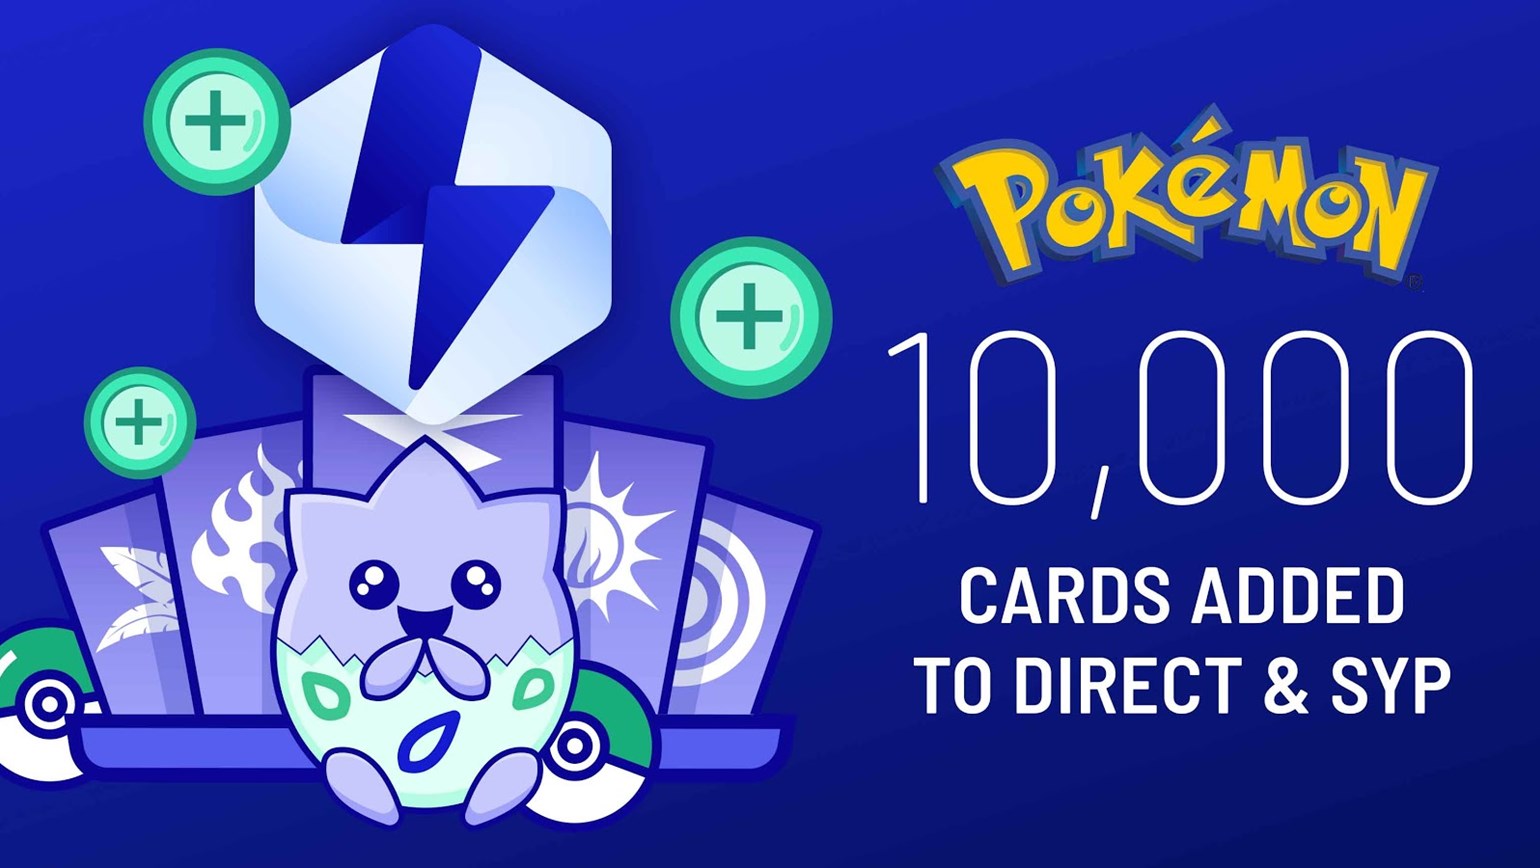 New Pokémon Legacy Sets, adding over 10,000 cards to Direct and Store Your Products